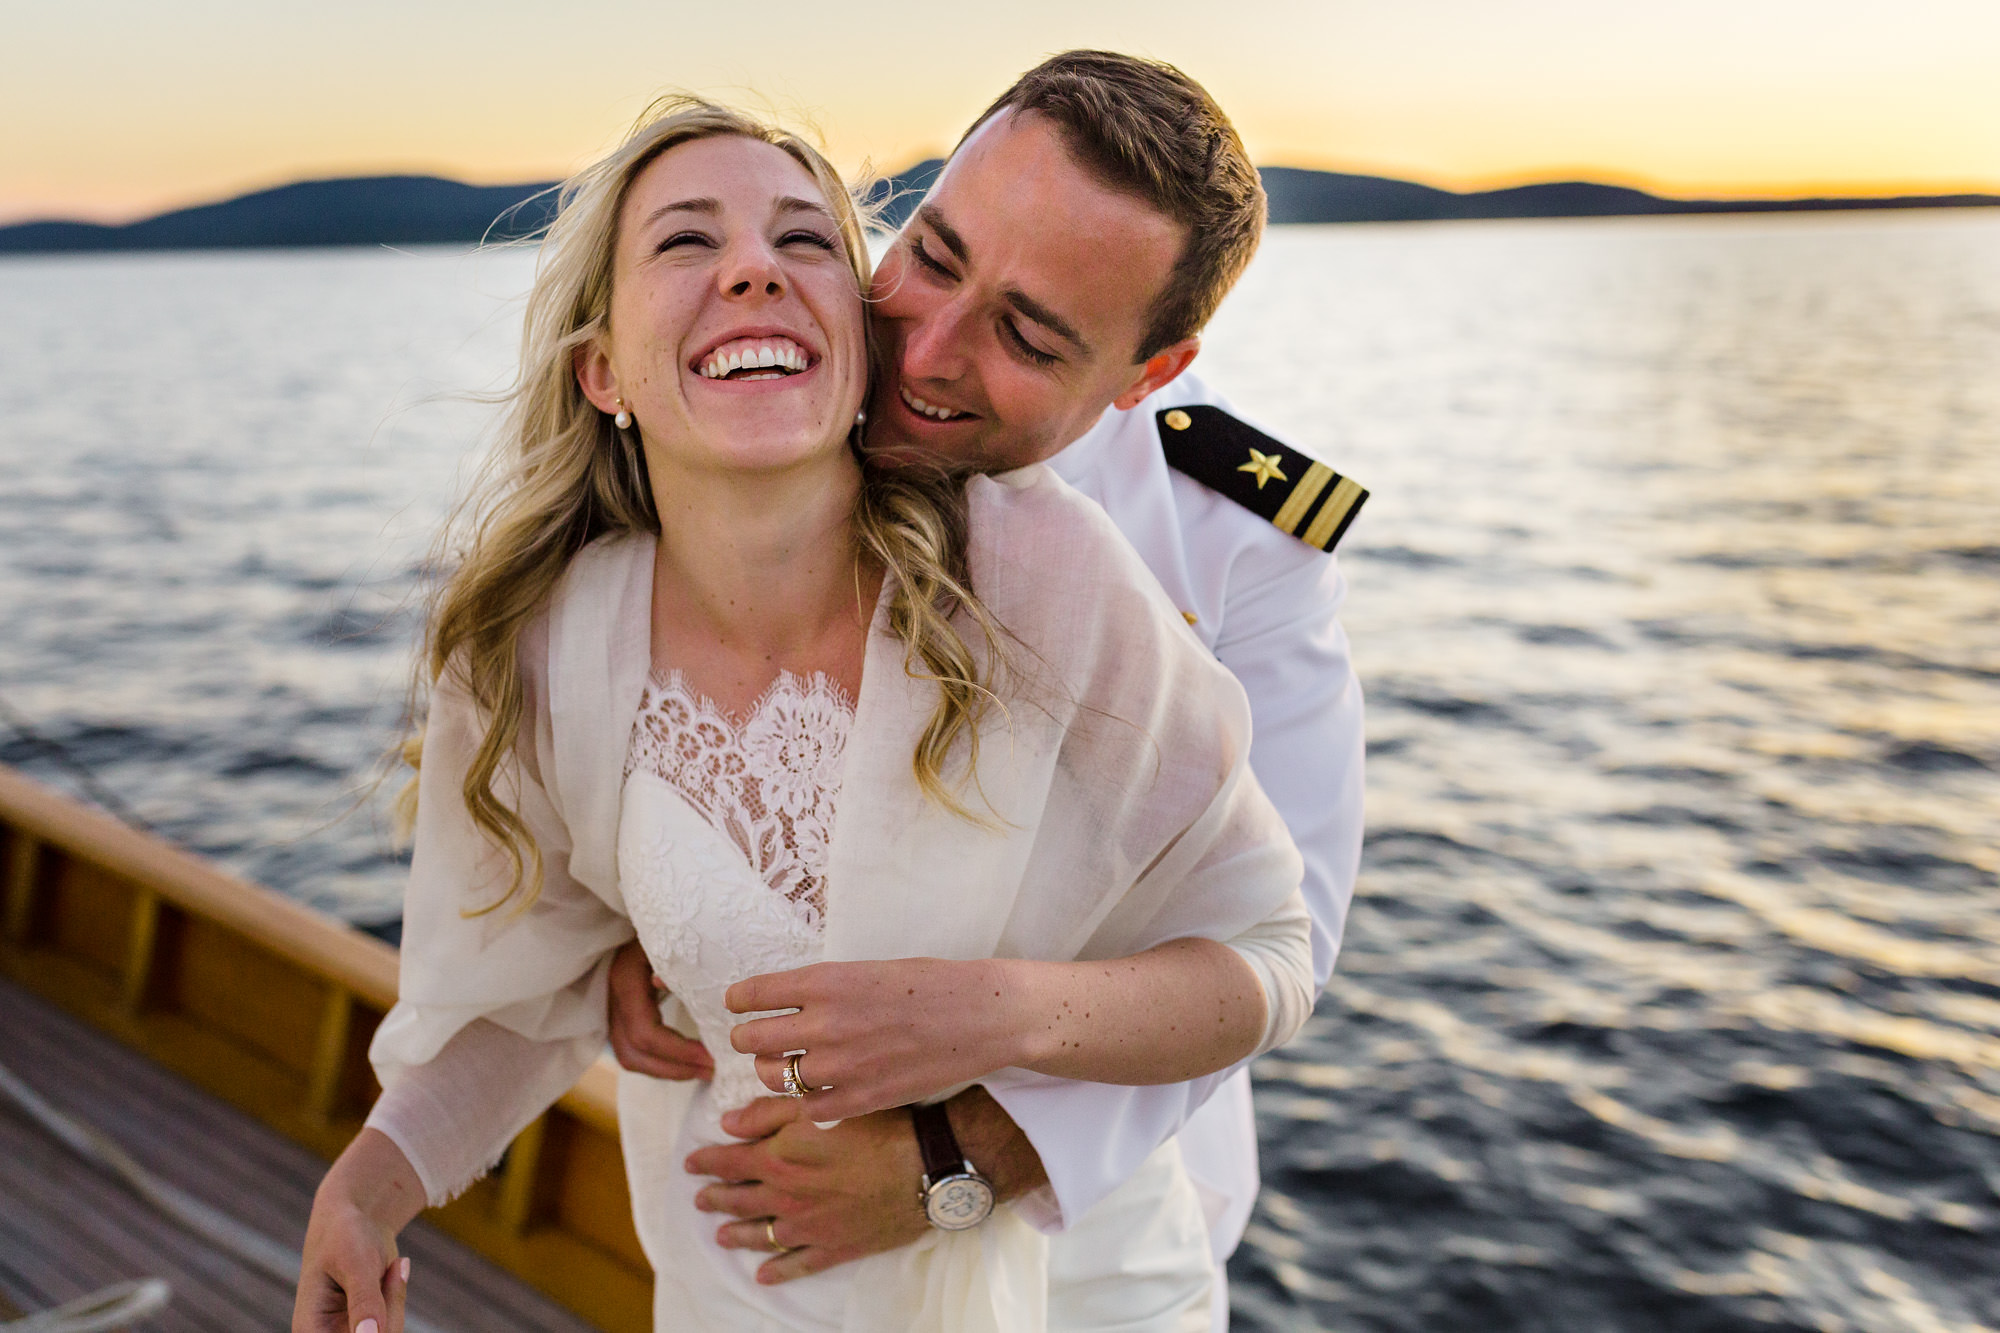 A bride and groom enjoy the sunset on their ride home on the Schooner Olad after their wedding.